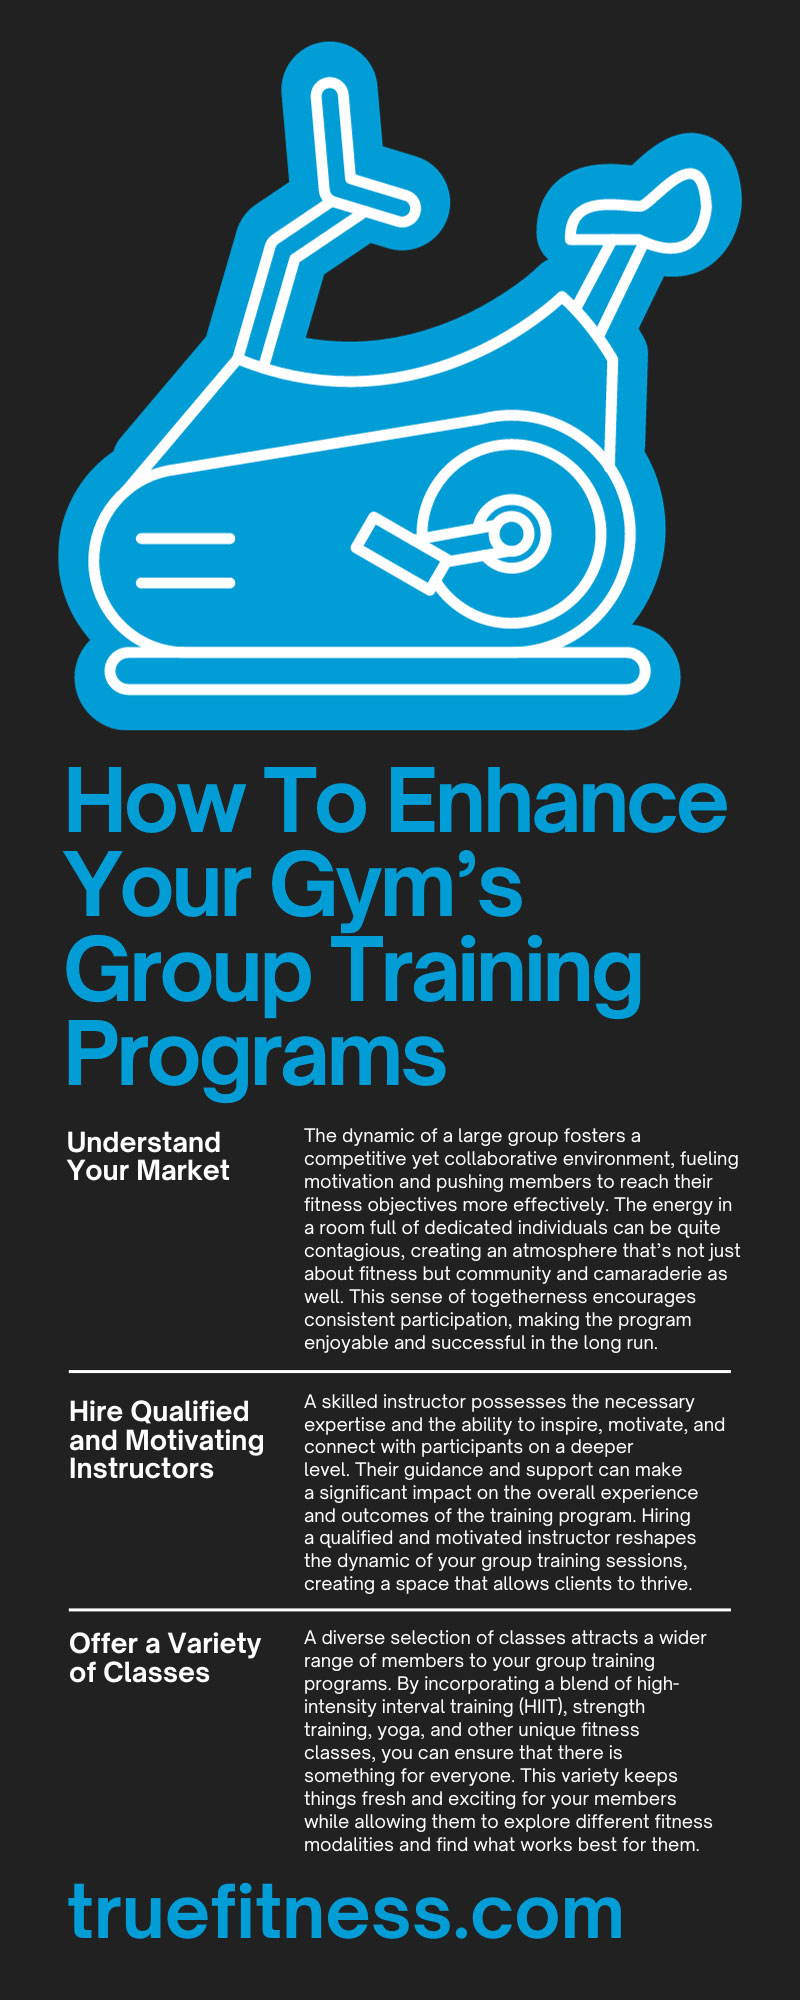 How To Enhance Your Gym’s Group Training Programs